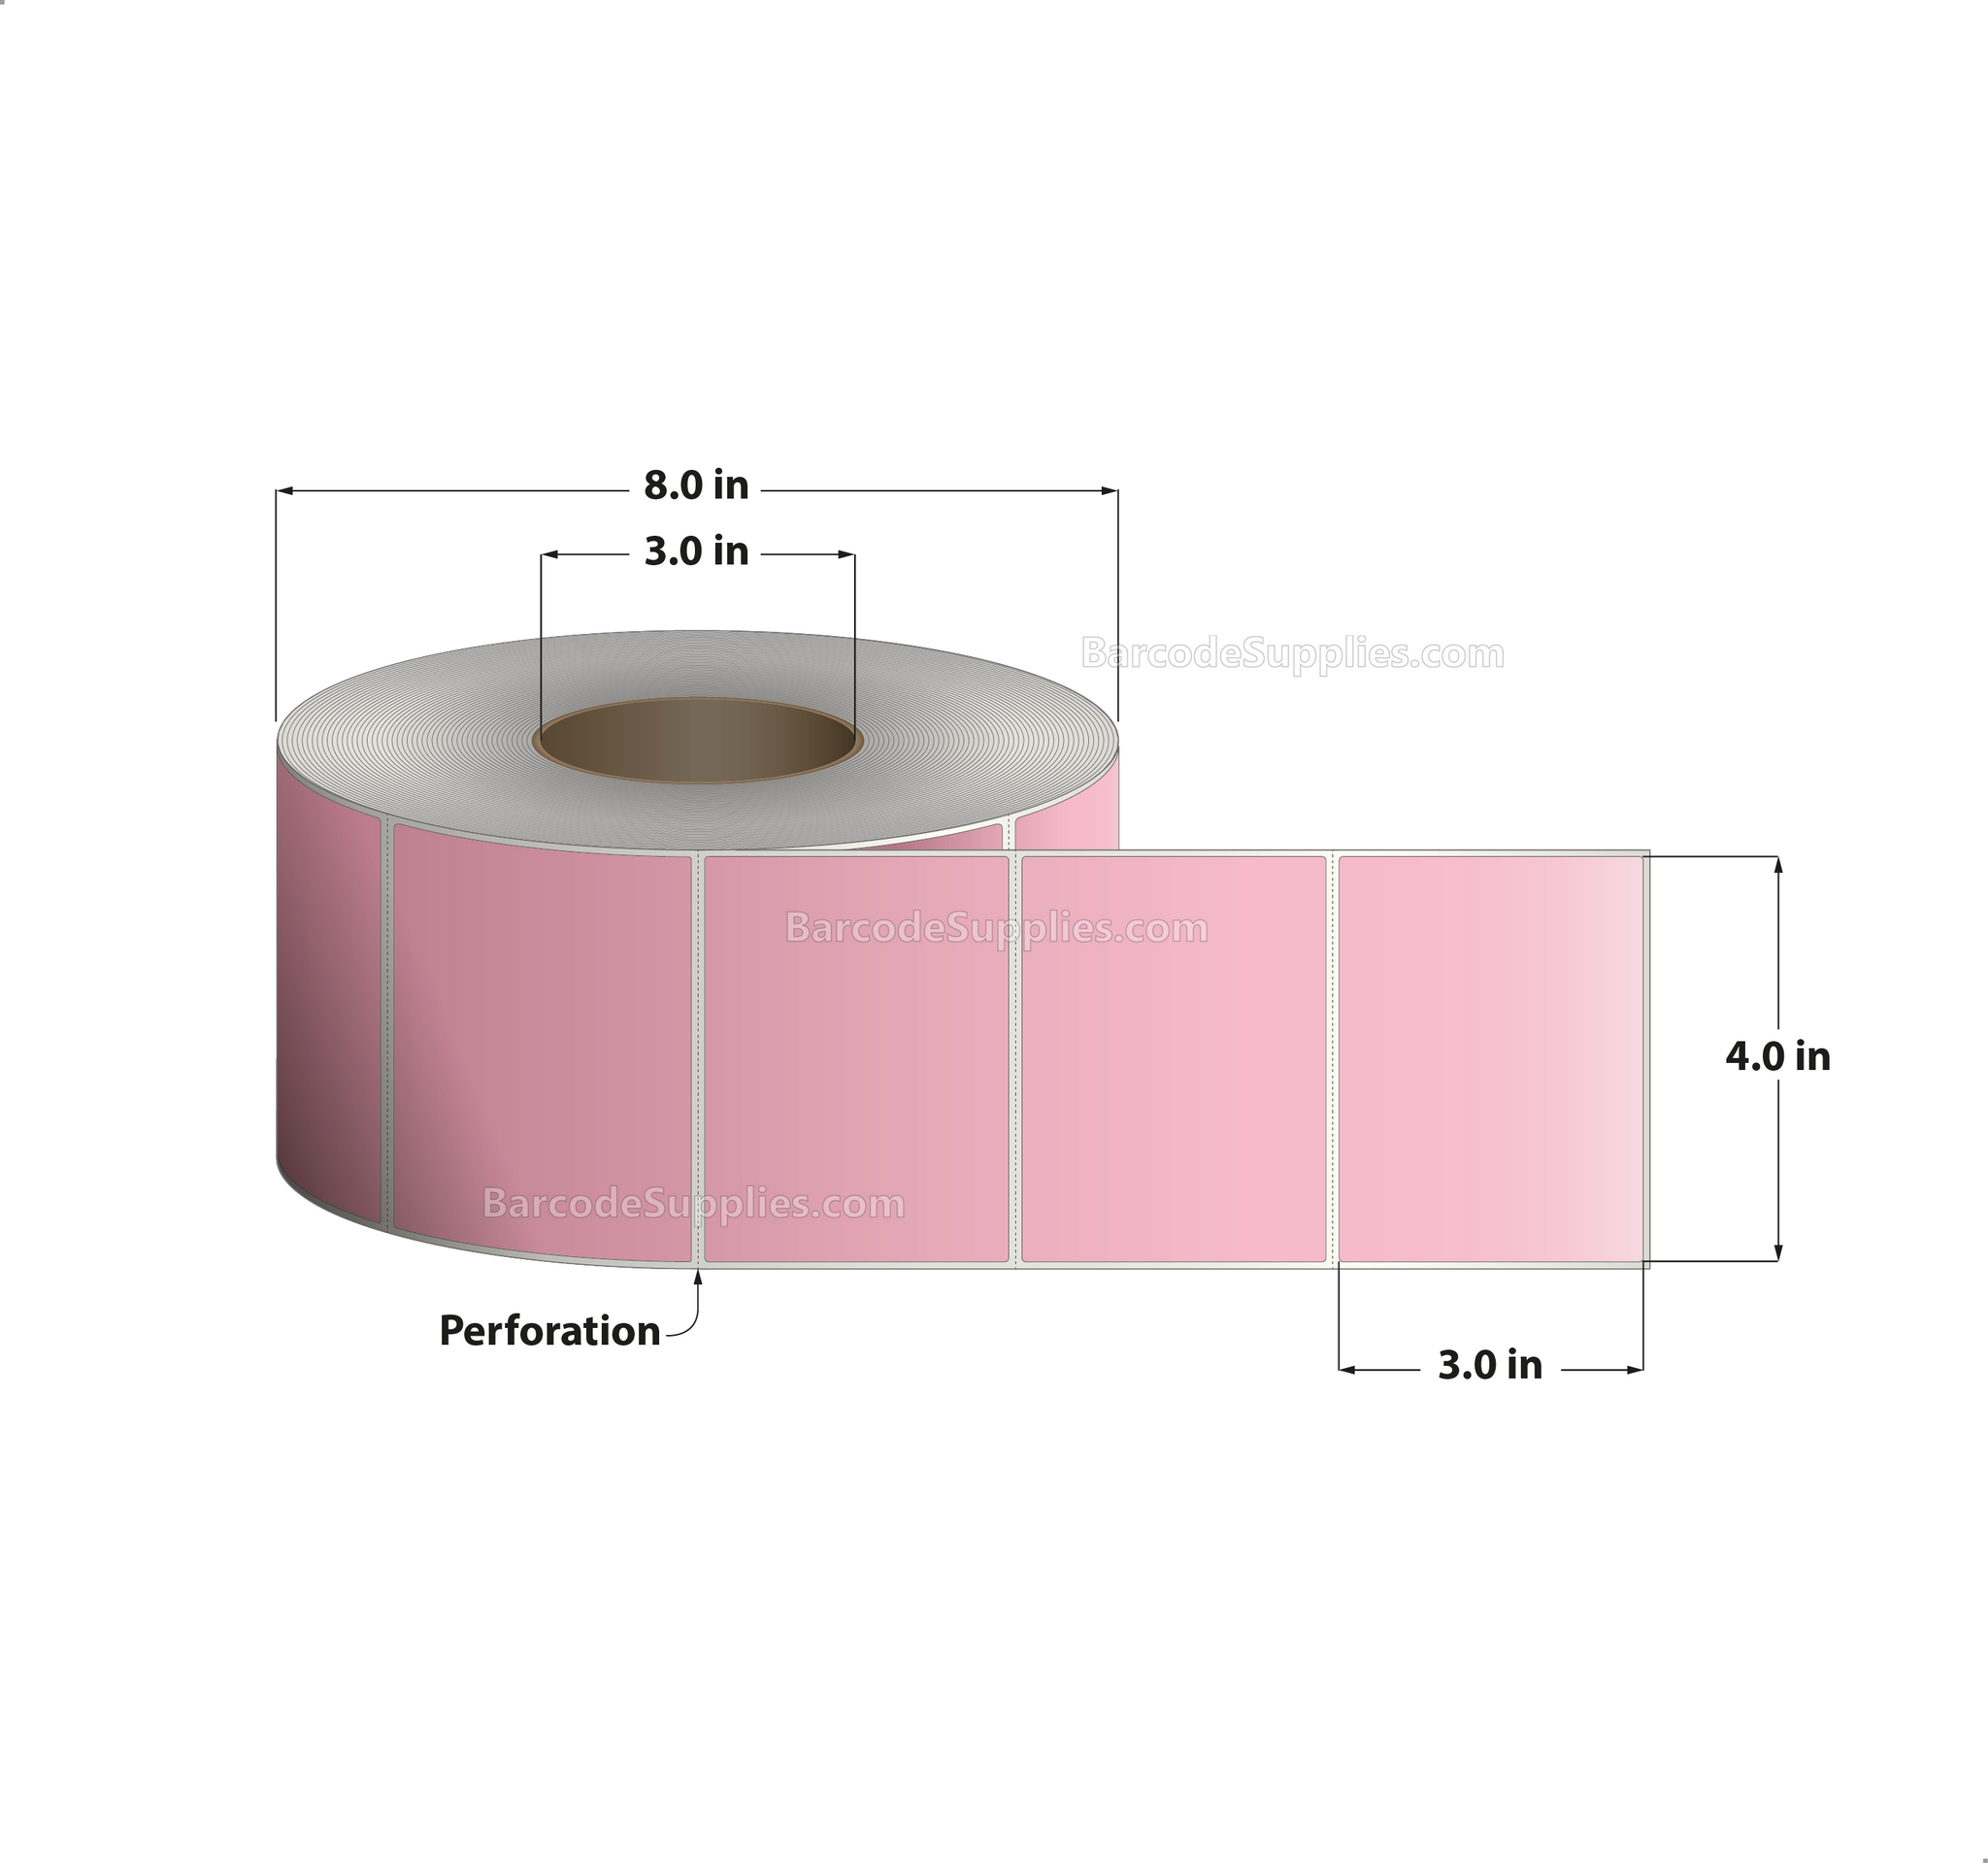 Products 4 x 3 Thermal Transfer 176 Pink Labels With Permanent Adhesive - Perforated - 1900 Labels Per Roll - Carton Of 4 Rolls - 7600 Labels Total - MPN: RFC-4-3-1900-PK